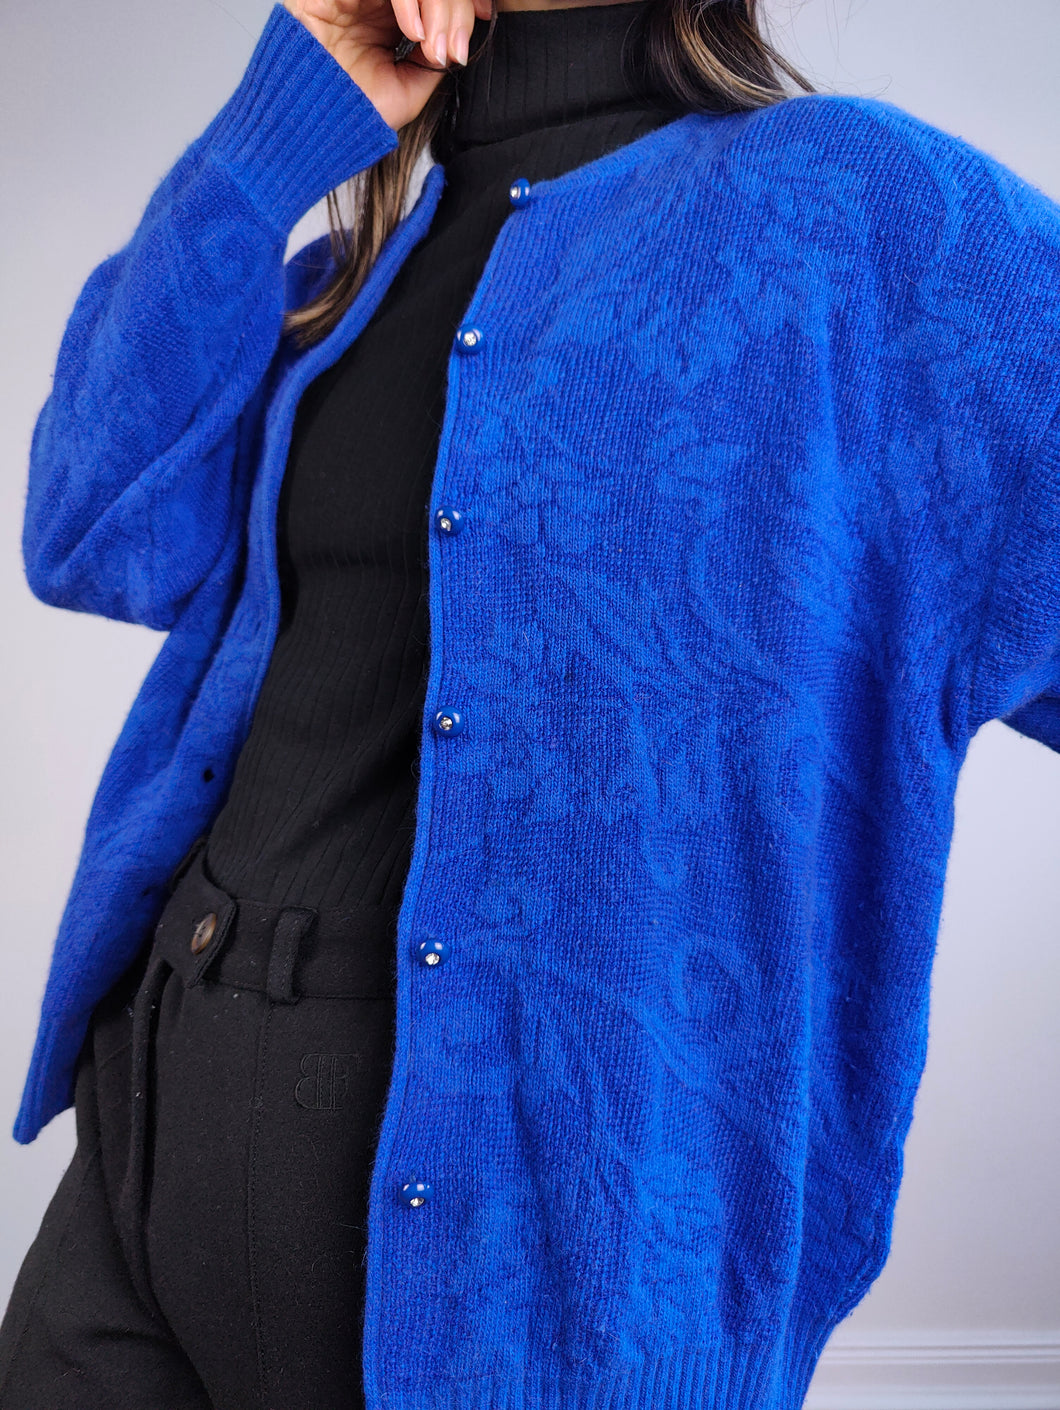 The Electric Blue Wool Cardigan | Vintage wool mix knit knitted jacket baroque floral pattern sweater S-M